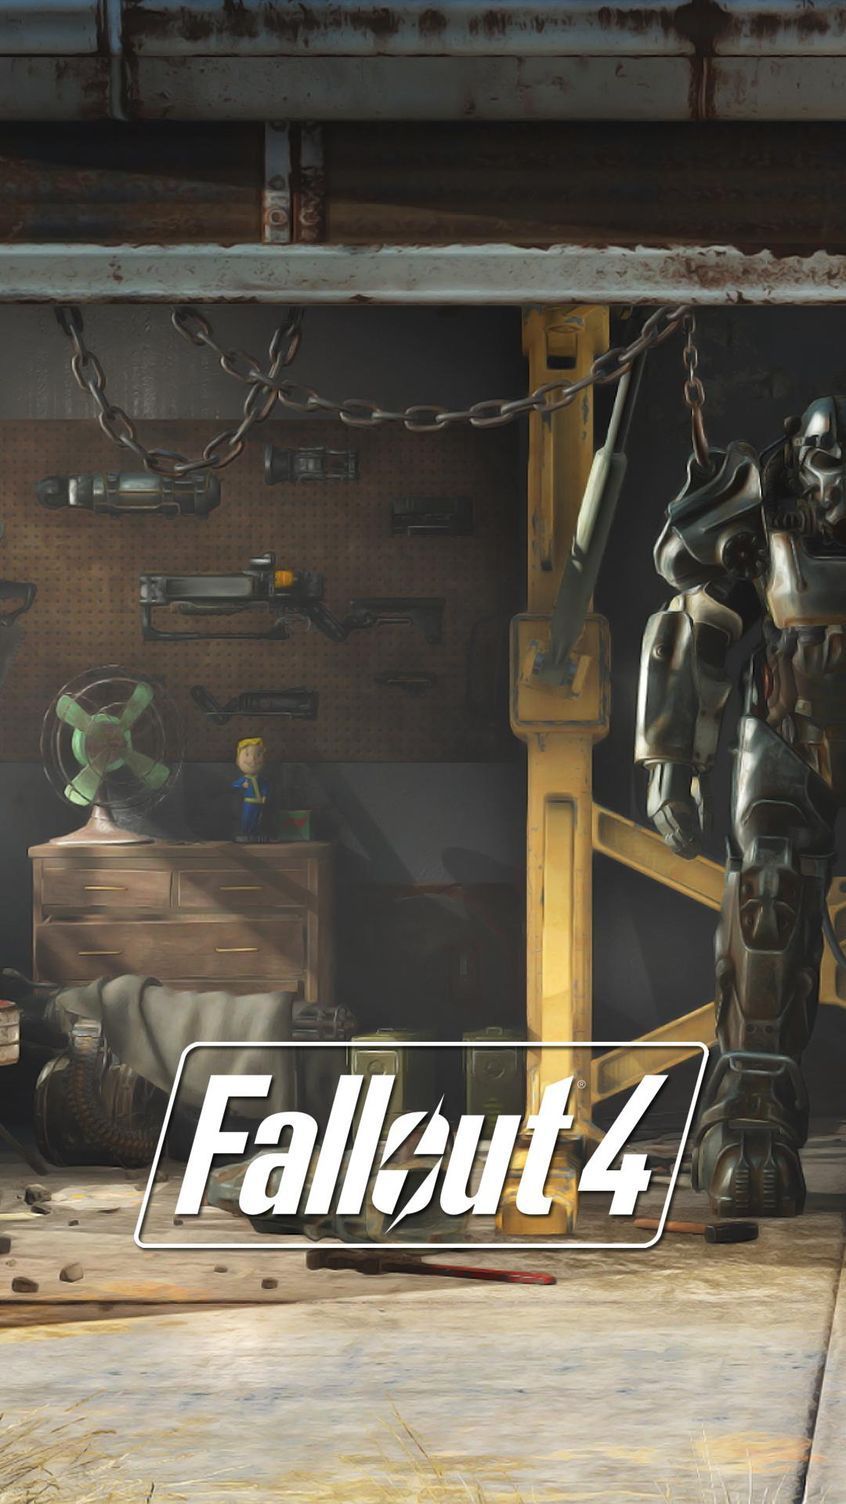 Put Fallout 4 On Your Phone With These Lock Screen Wallpapers